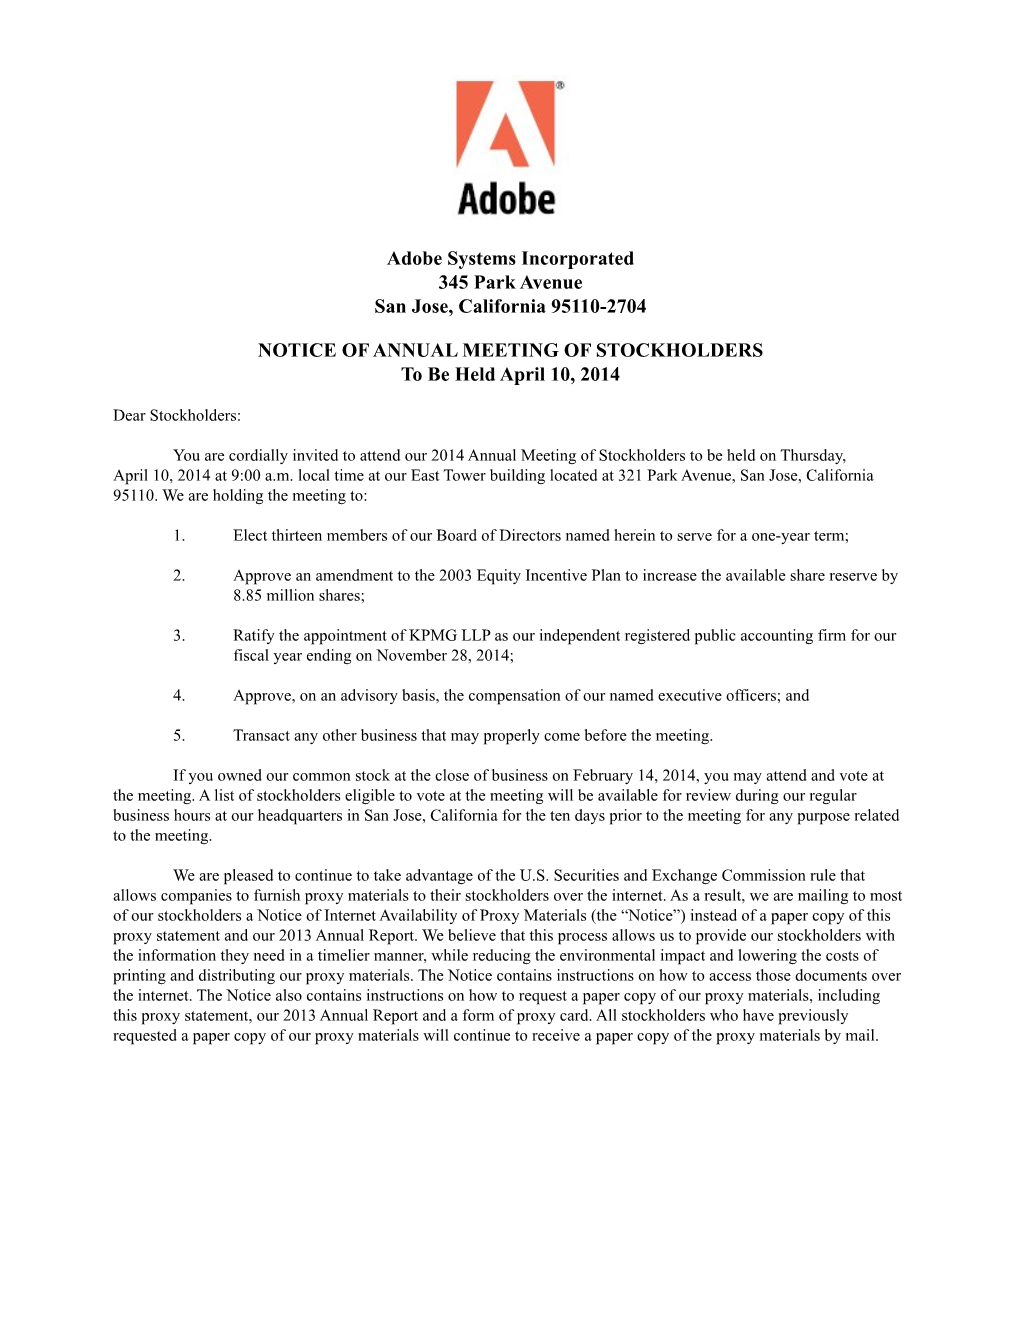 Adobe Systems Incorporated 2014 Proxy Statement